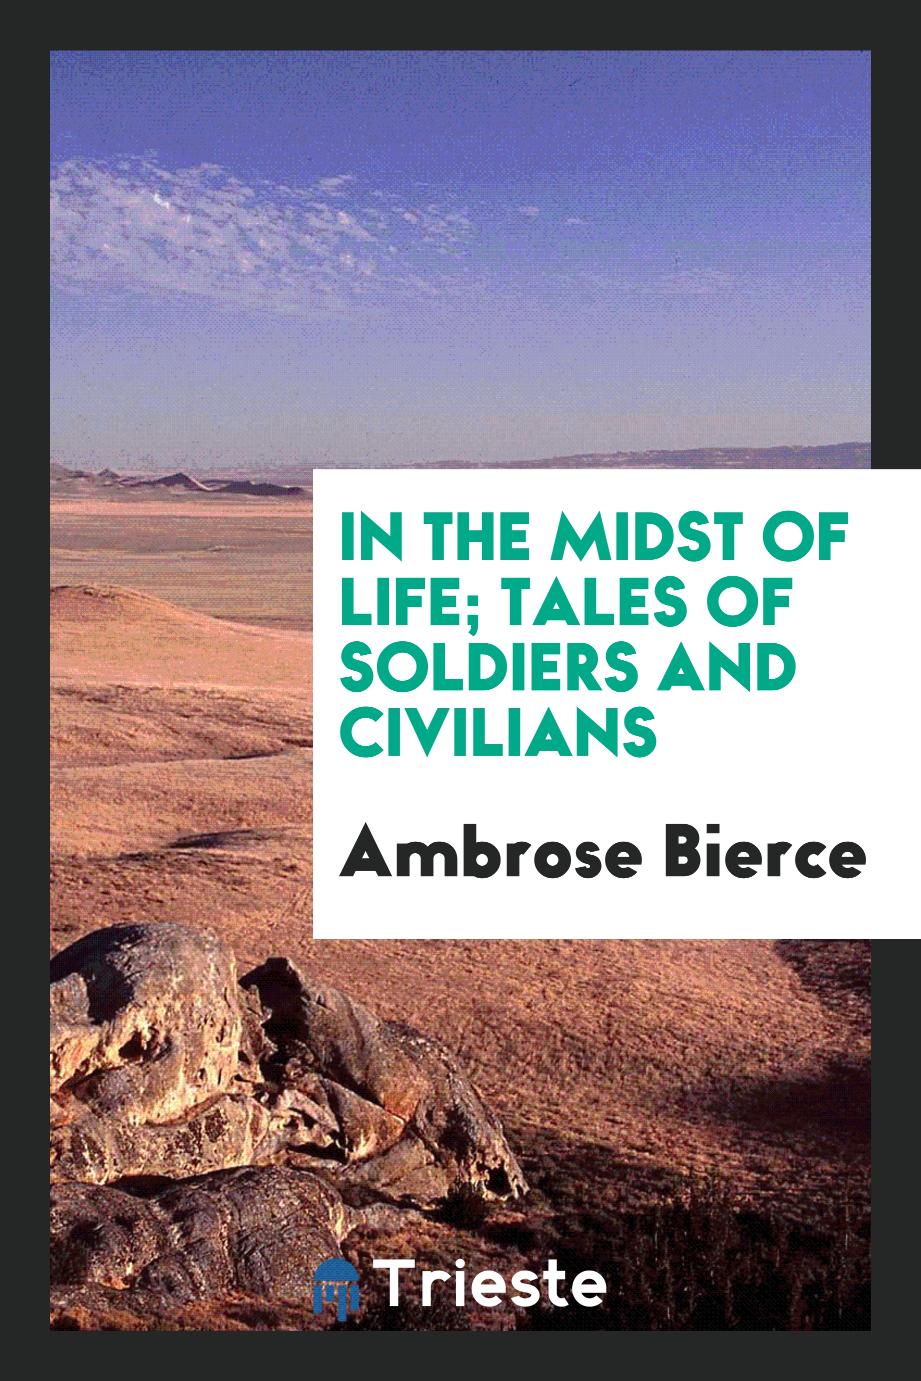 In the midst of life; tales of soldiers and civilians